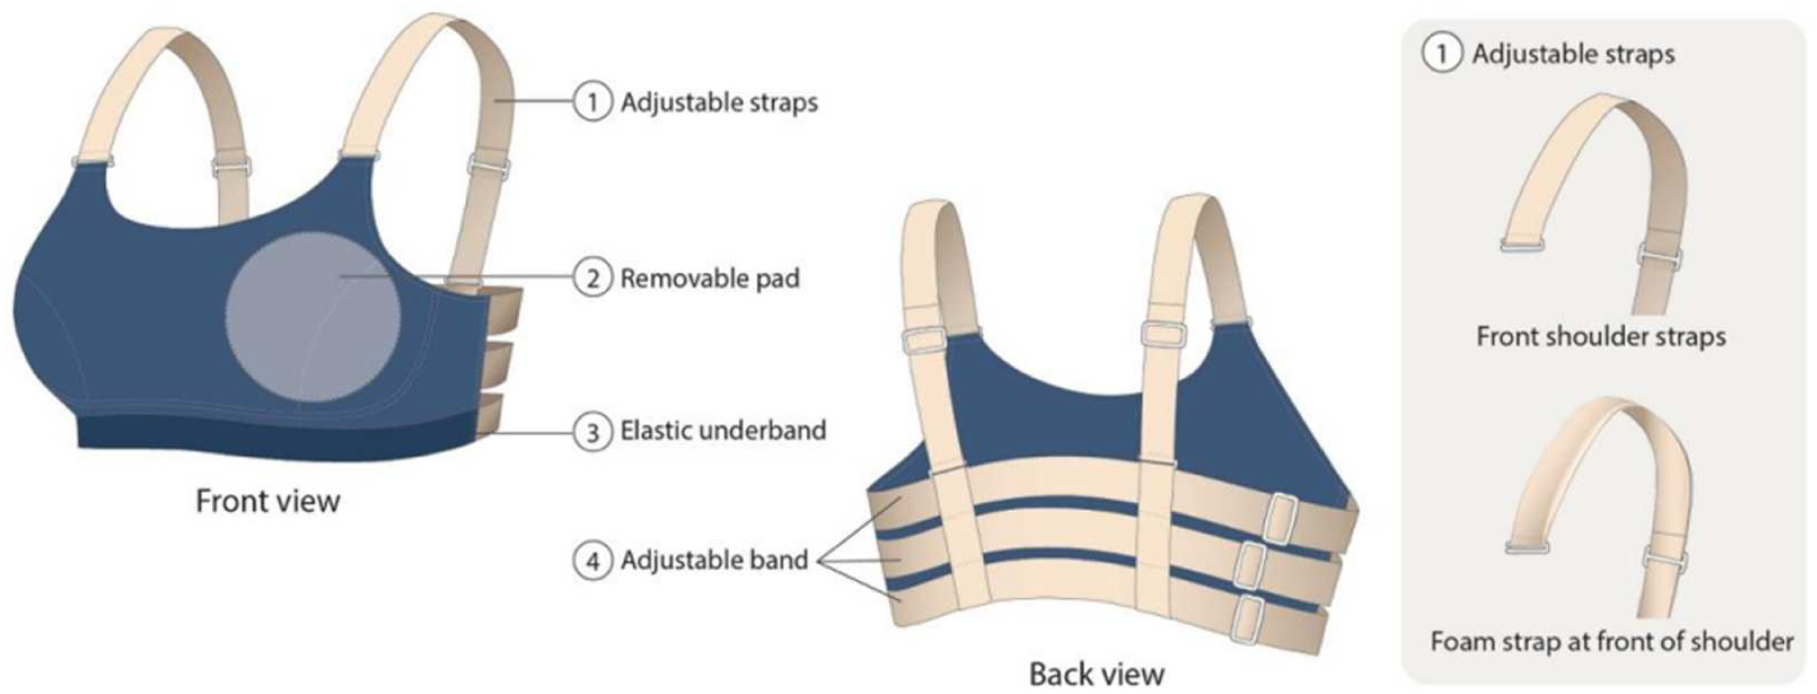 Underbust – Band Size Relationship: An Analysis